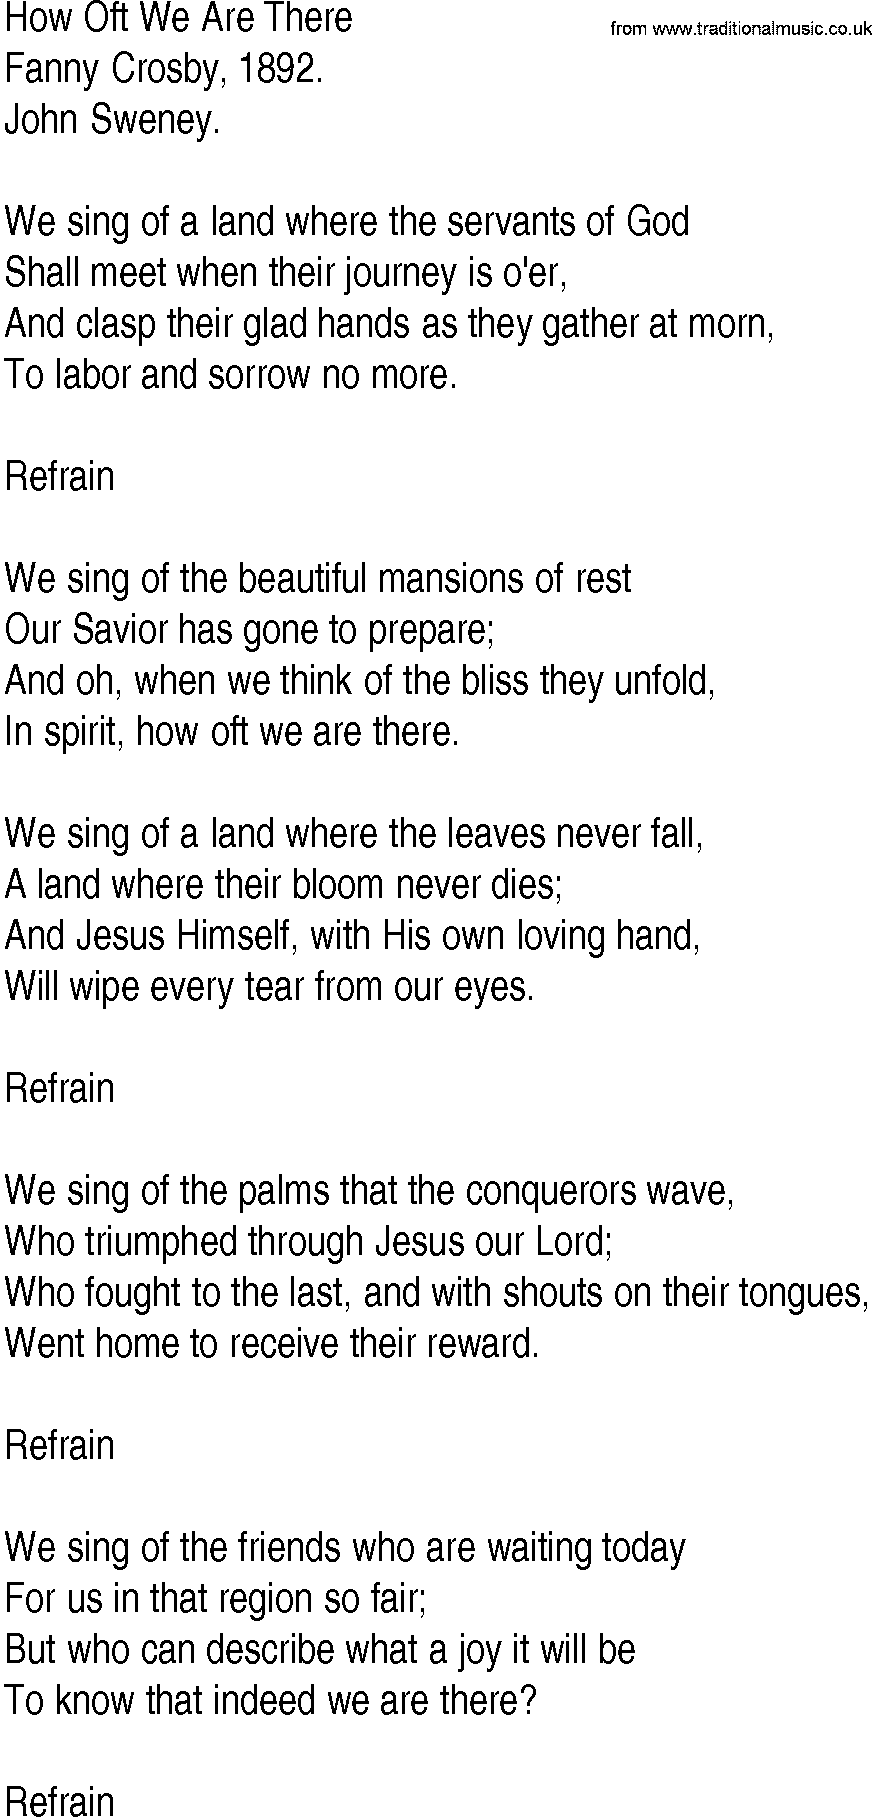 Hymn and Gospel Song: How Oft We Are There by Fanny Crosby lyrics